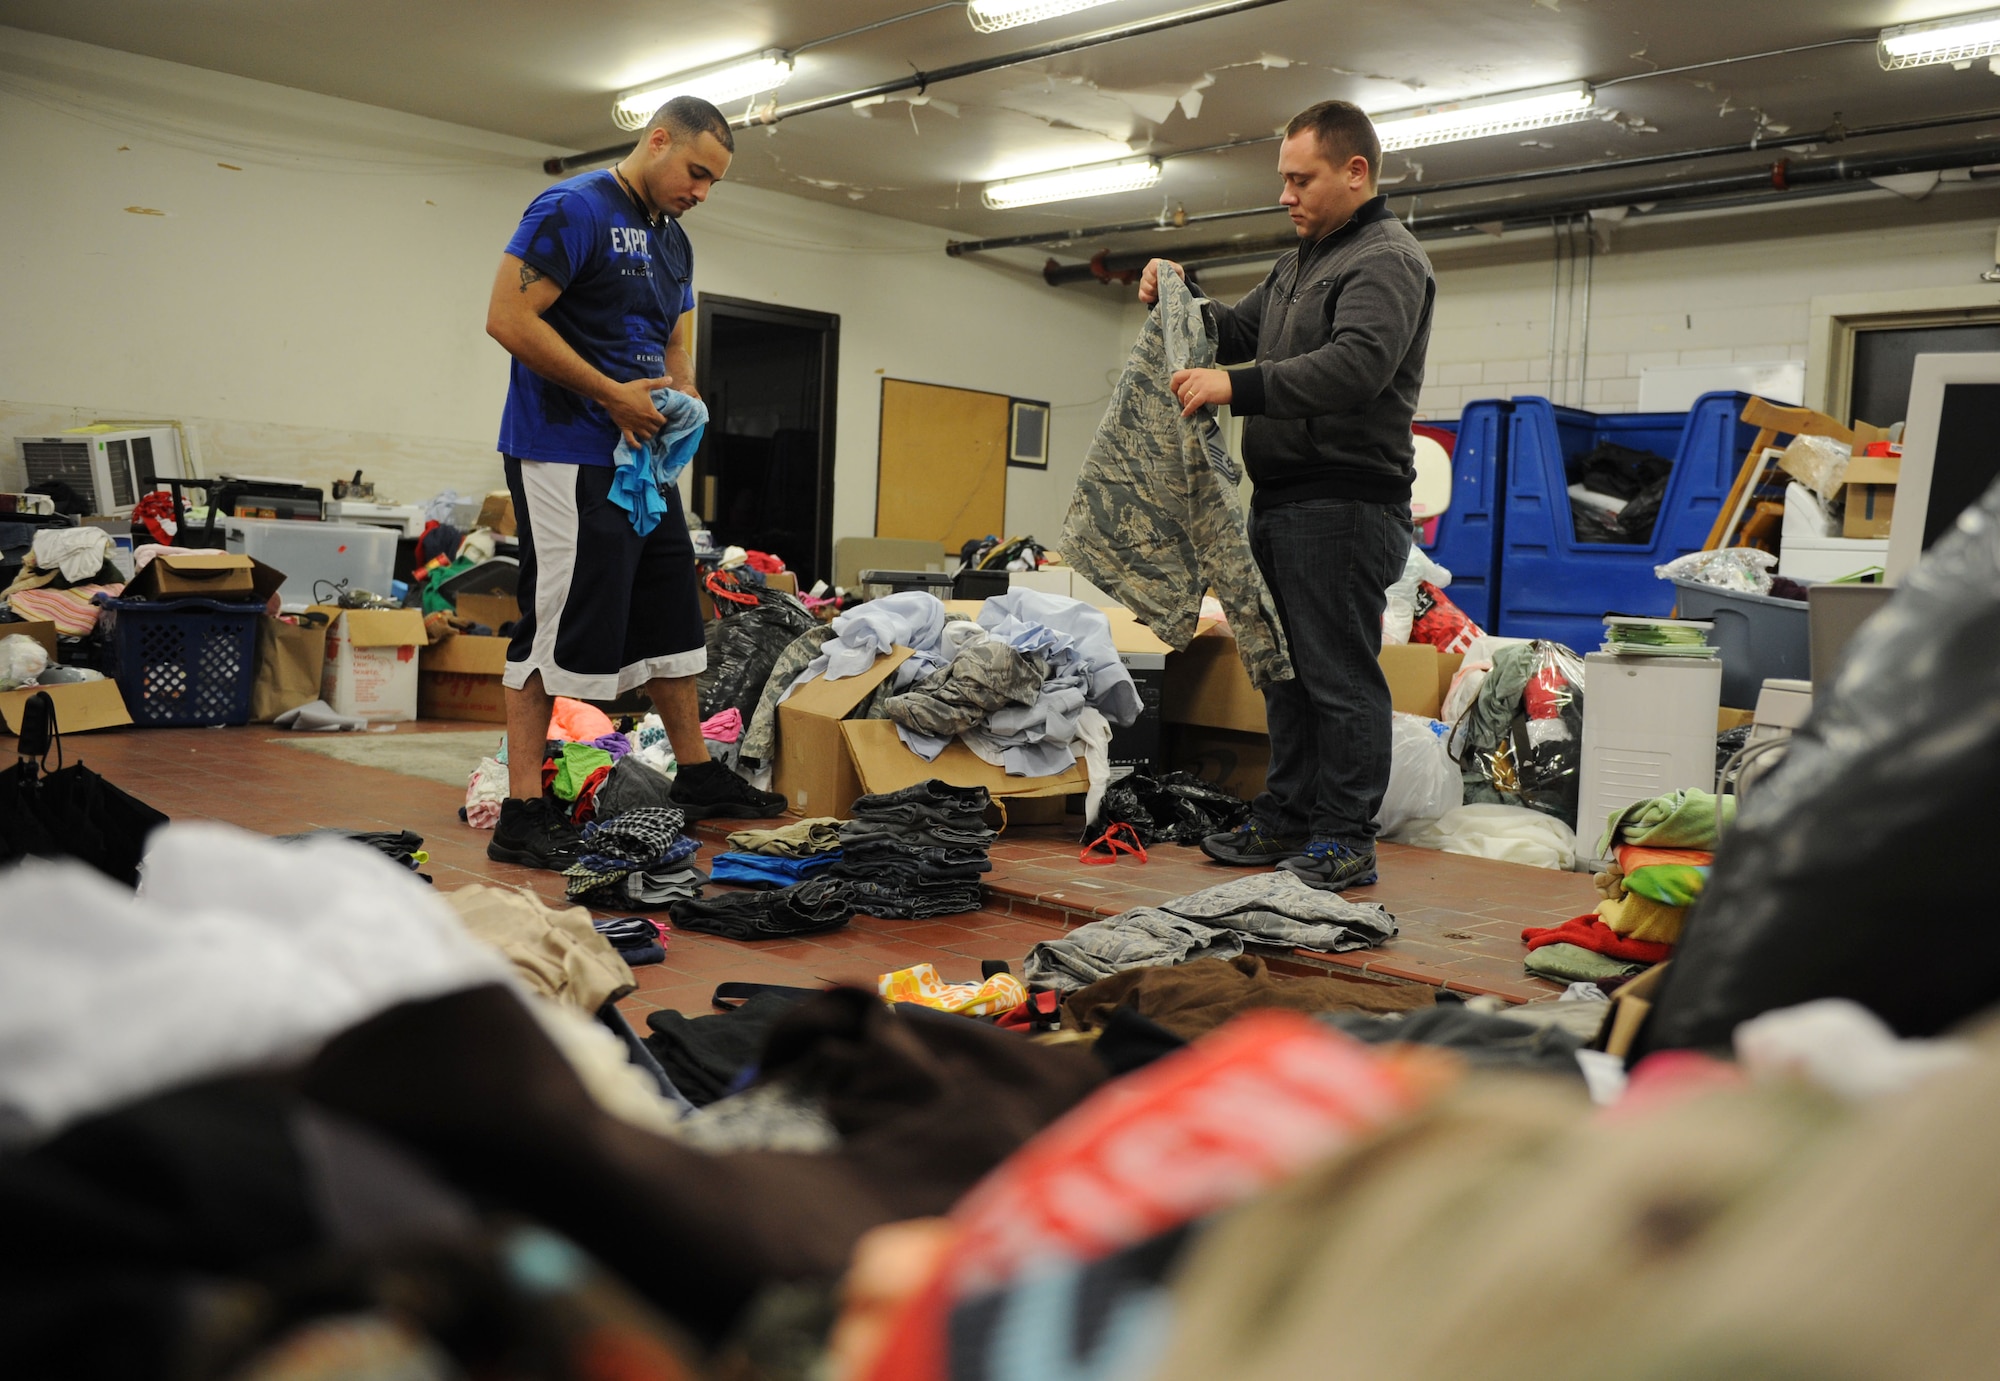 Tech. Sgts. Alex De Fex, 336th Training Squadron student, and William Thompson, 335th TRS student, sort and fold clothing items at the Airman’s Attic Aug. 12, 2016, on Keesler Air Force Base, Miss. The Airman’s Attic assists enlisted members in pay grades E-1 through E-6 with obtaining basic household items at no cost. It is located at the corner of Meadows Drive and 1st Street, next to the Keesler Thrift Shop. (U.S. Air Force photo by Kemberly Groue/Released)